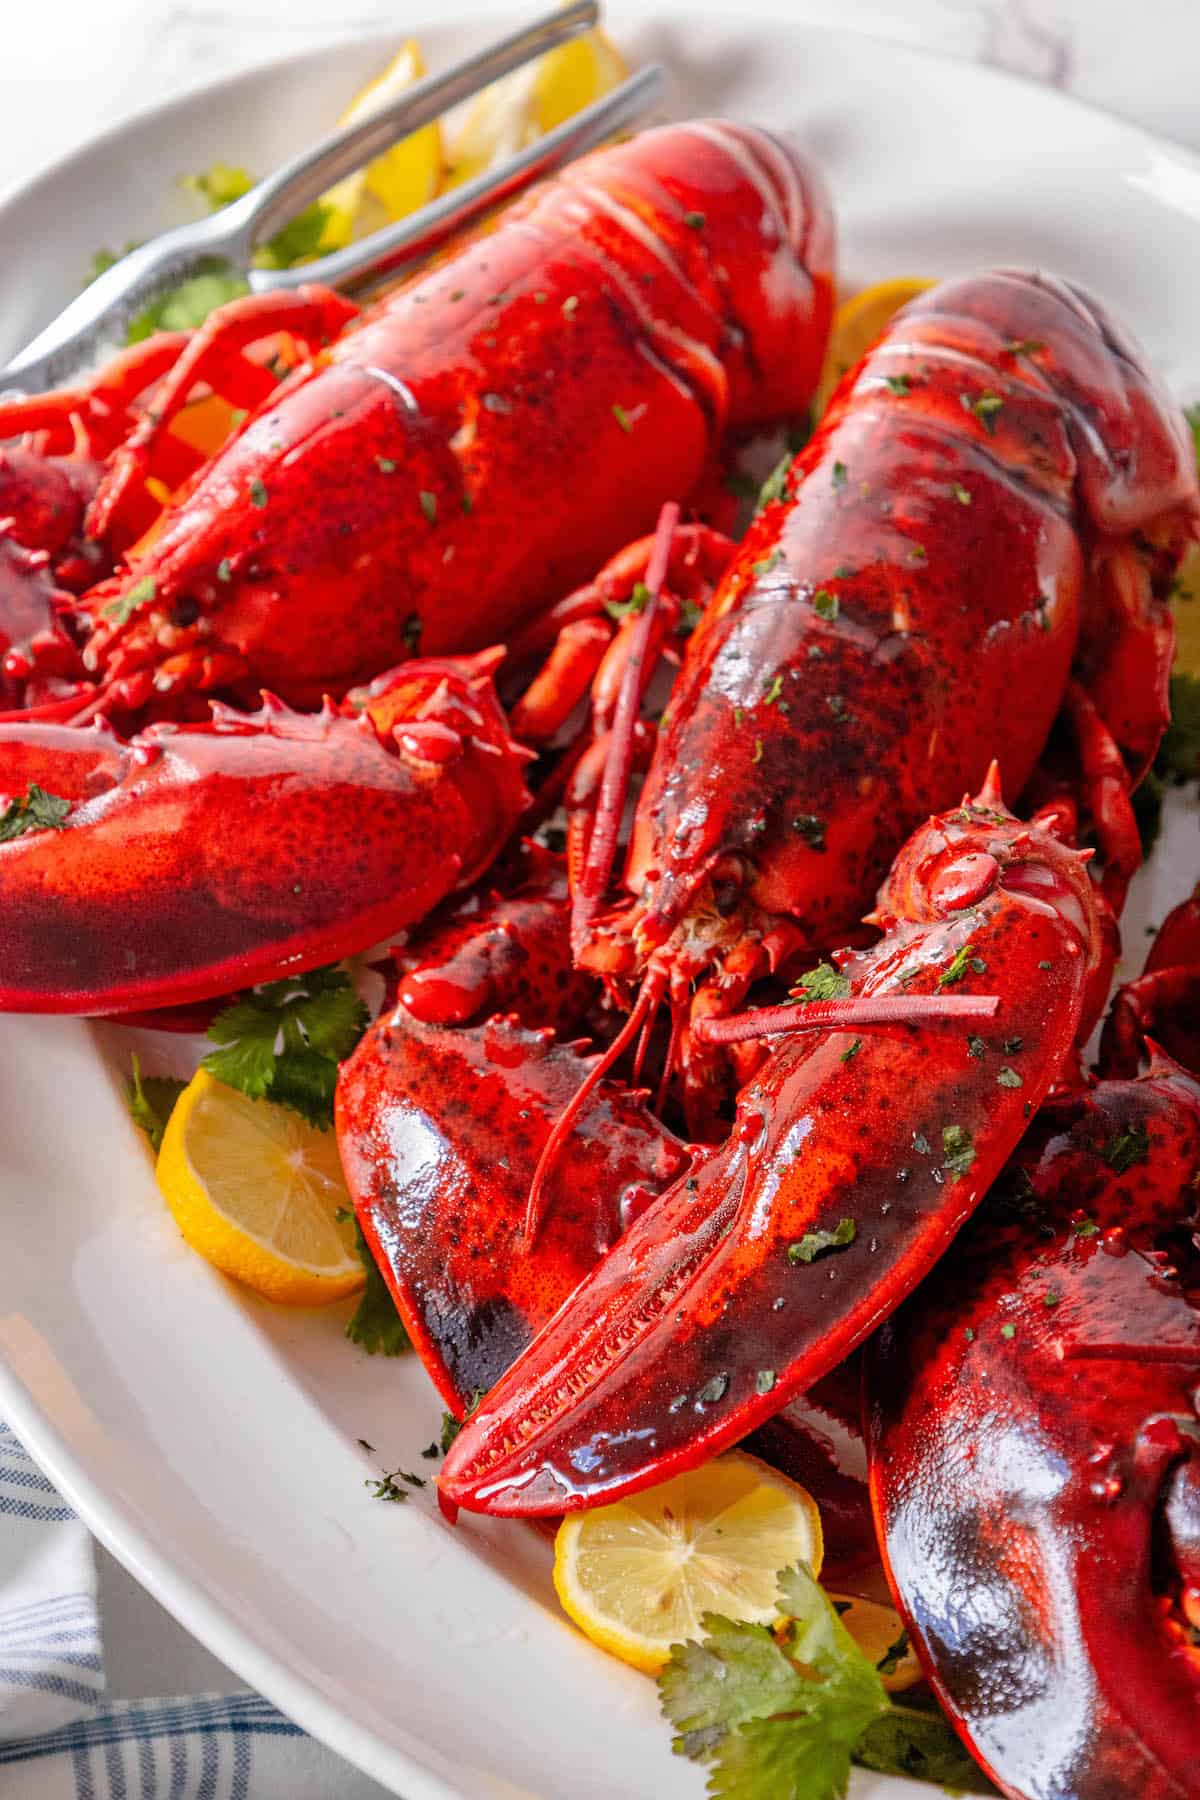 Keywords: lobster, lemon wedges
Description: Cooked lobsters beautifully arranged on a white plate, garnished with fresh lemon wedges.